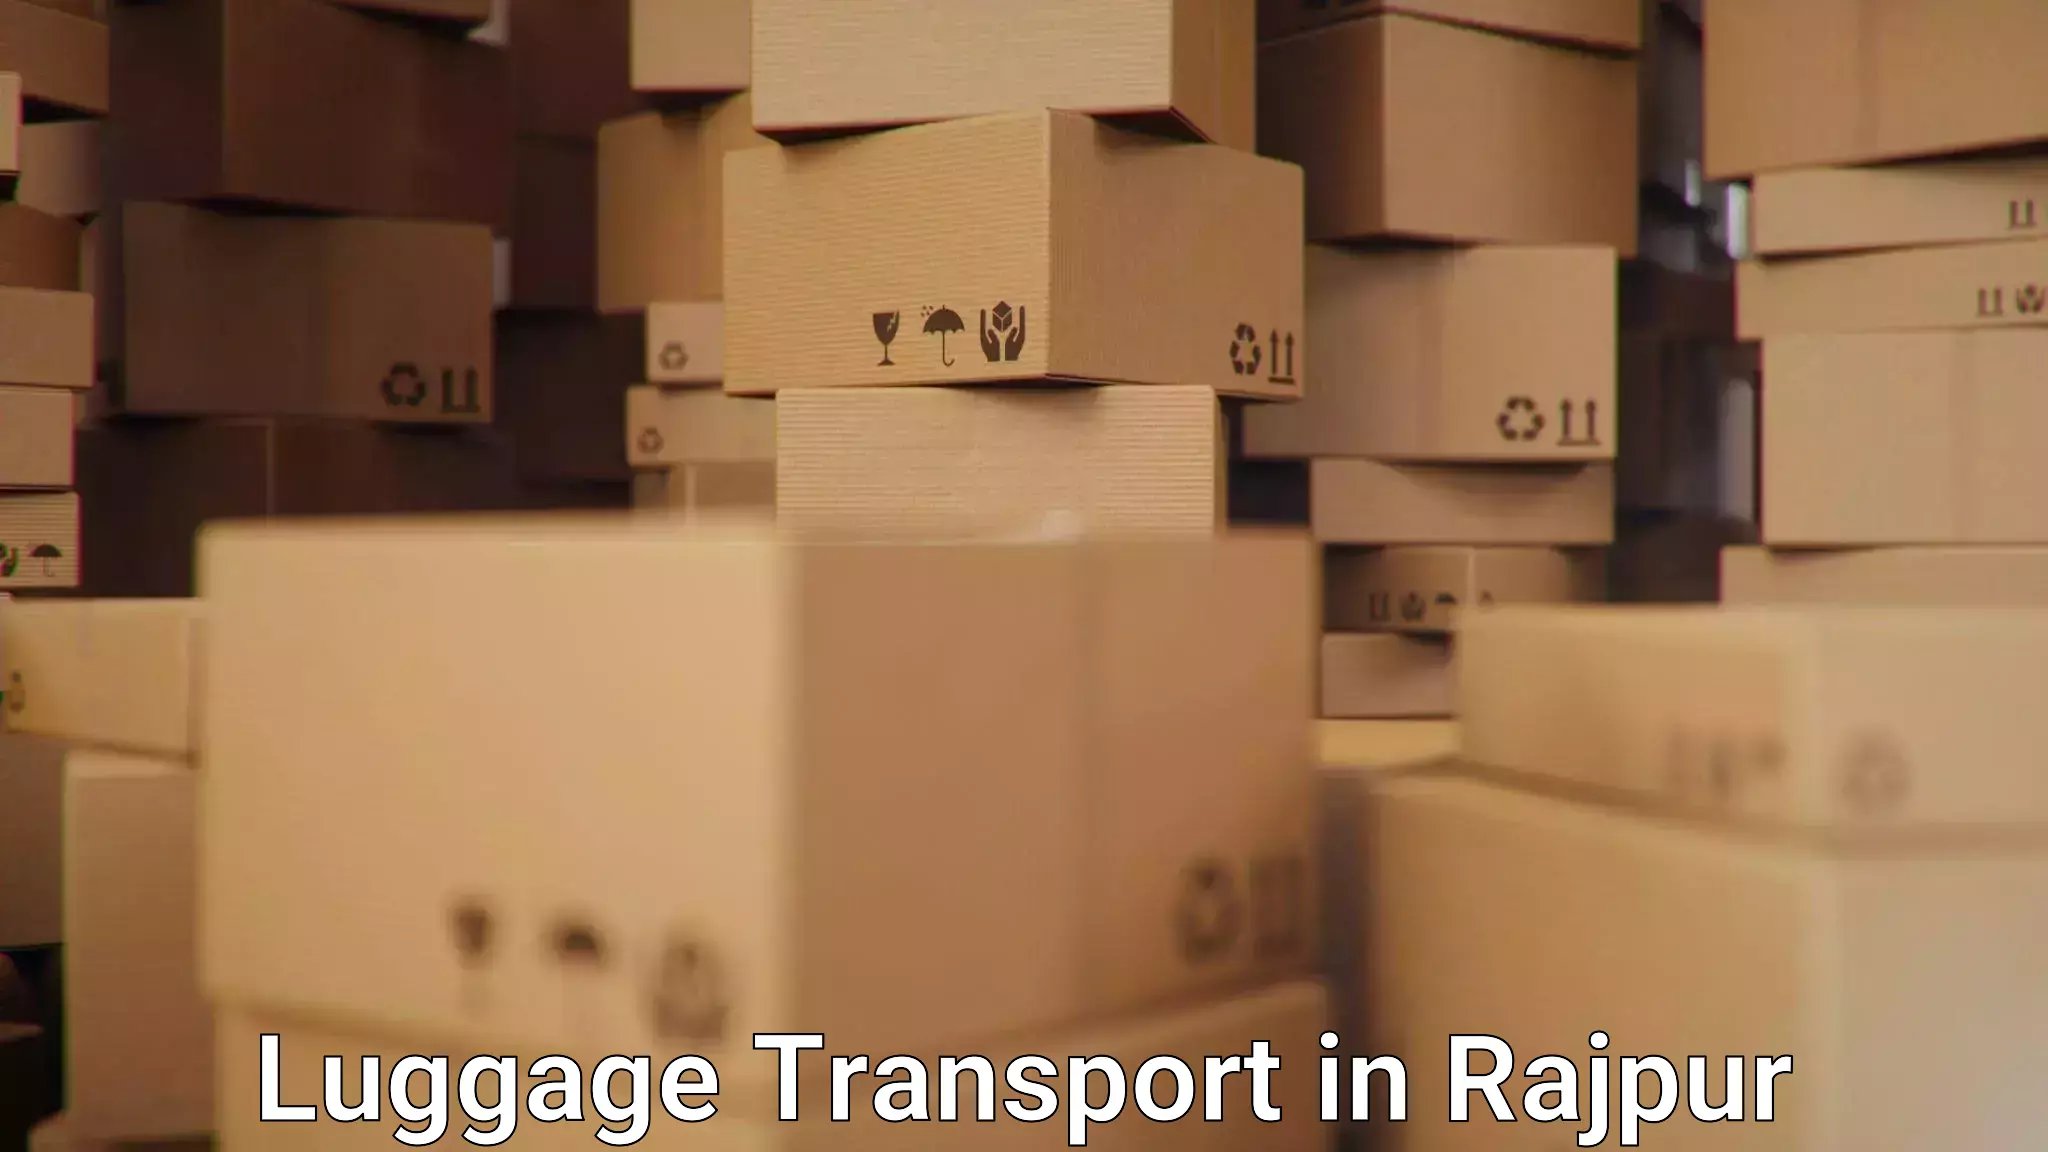 Luggage transport tips in Rajpur